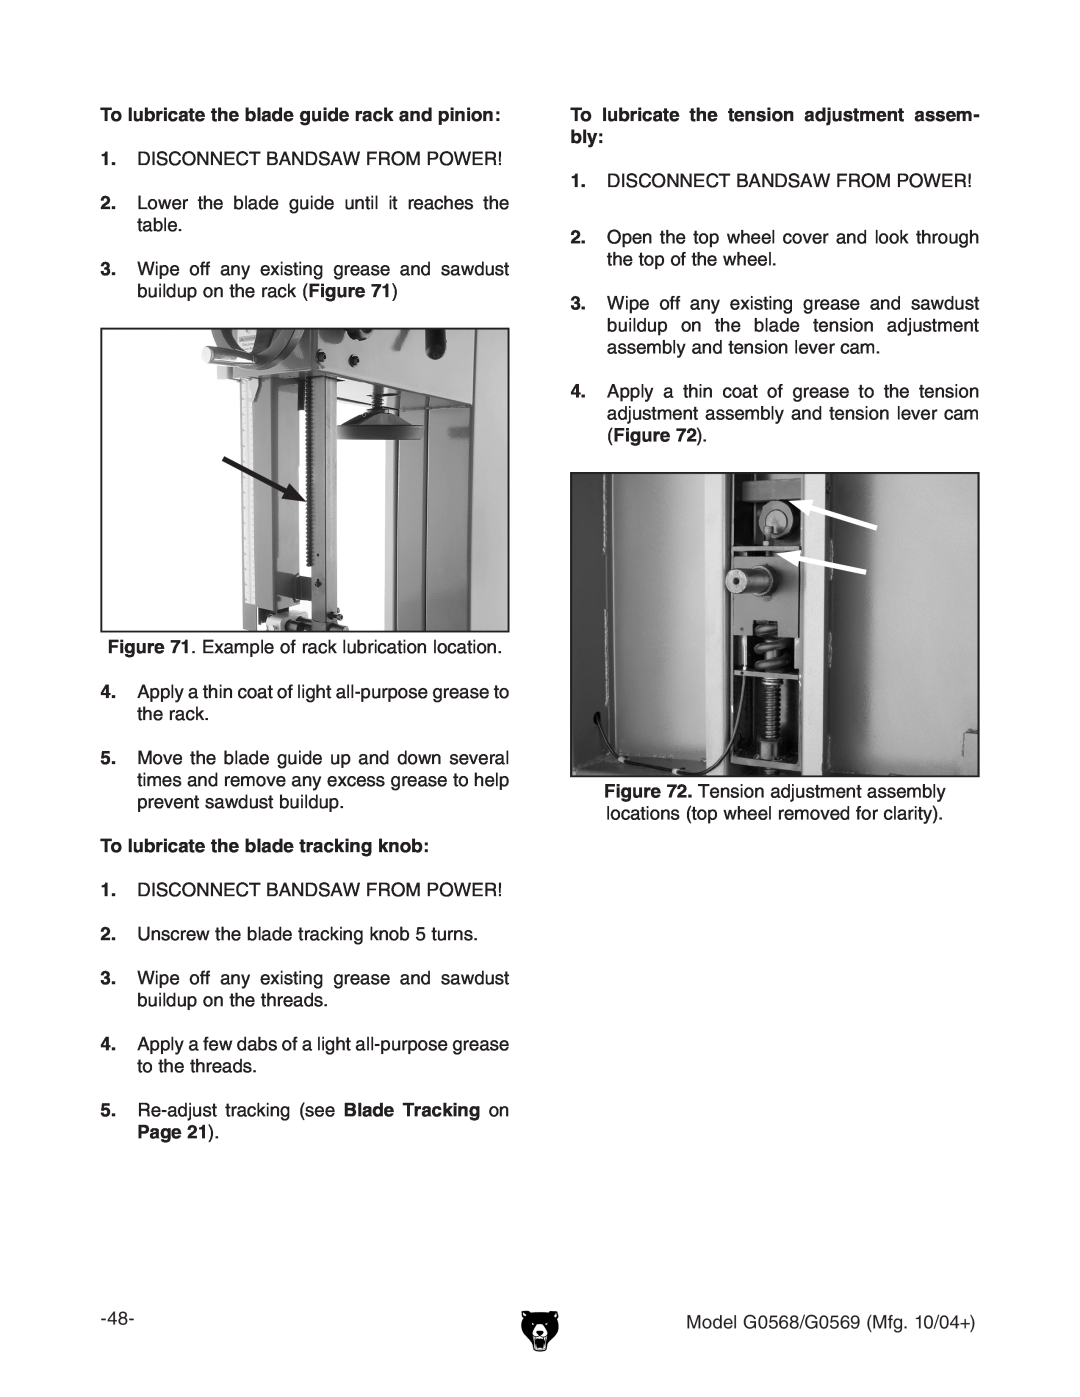 Grizzly G0569, G0568 owner manual To lubricate the blade guide rack and pinion, To lubricate the blade tracking knob 